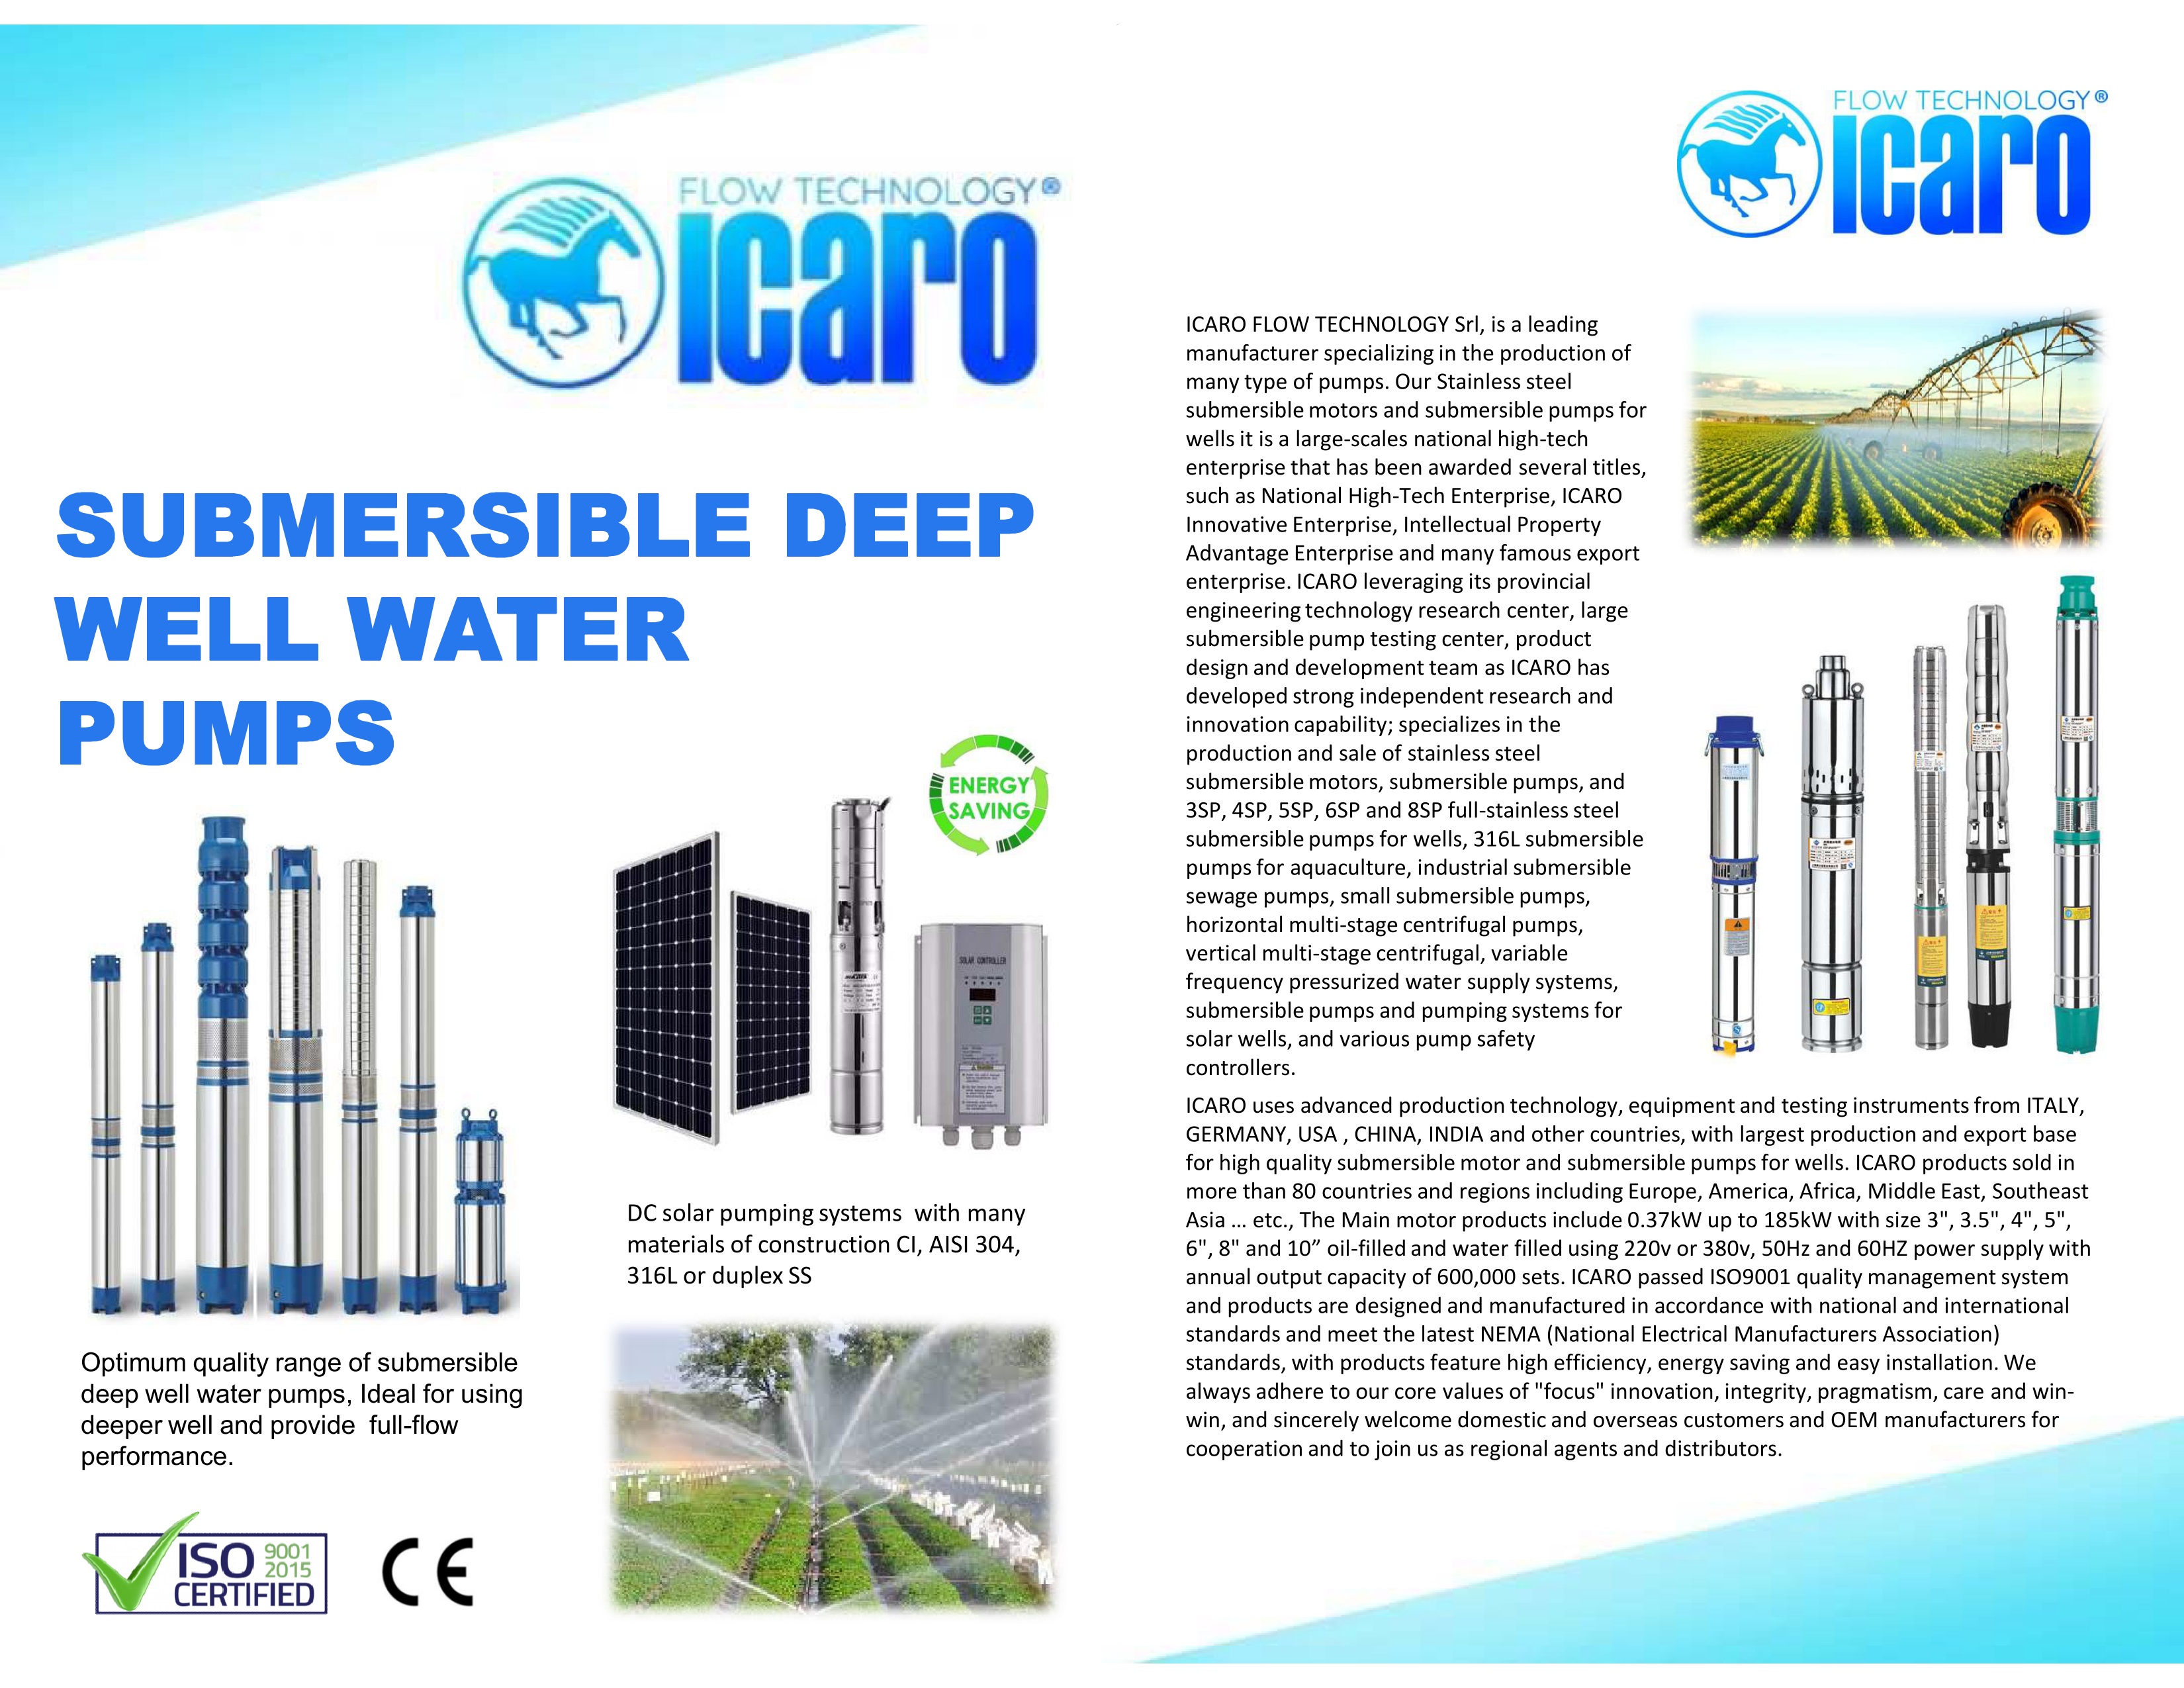 Submersible deep well water pumps.